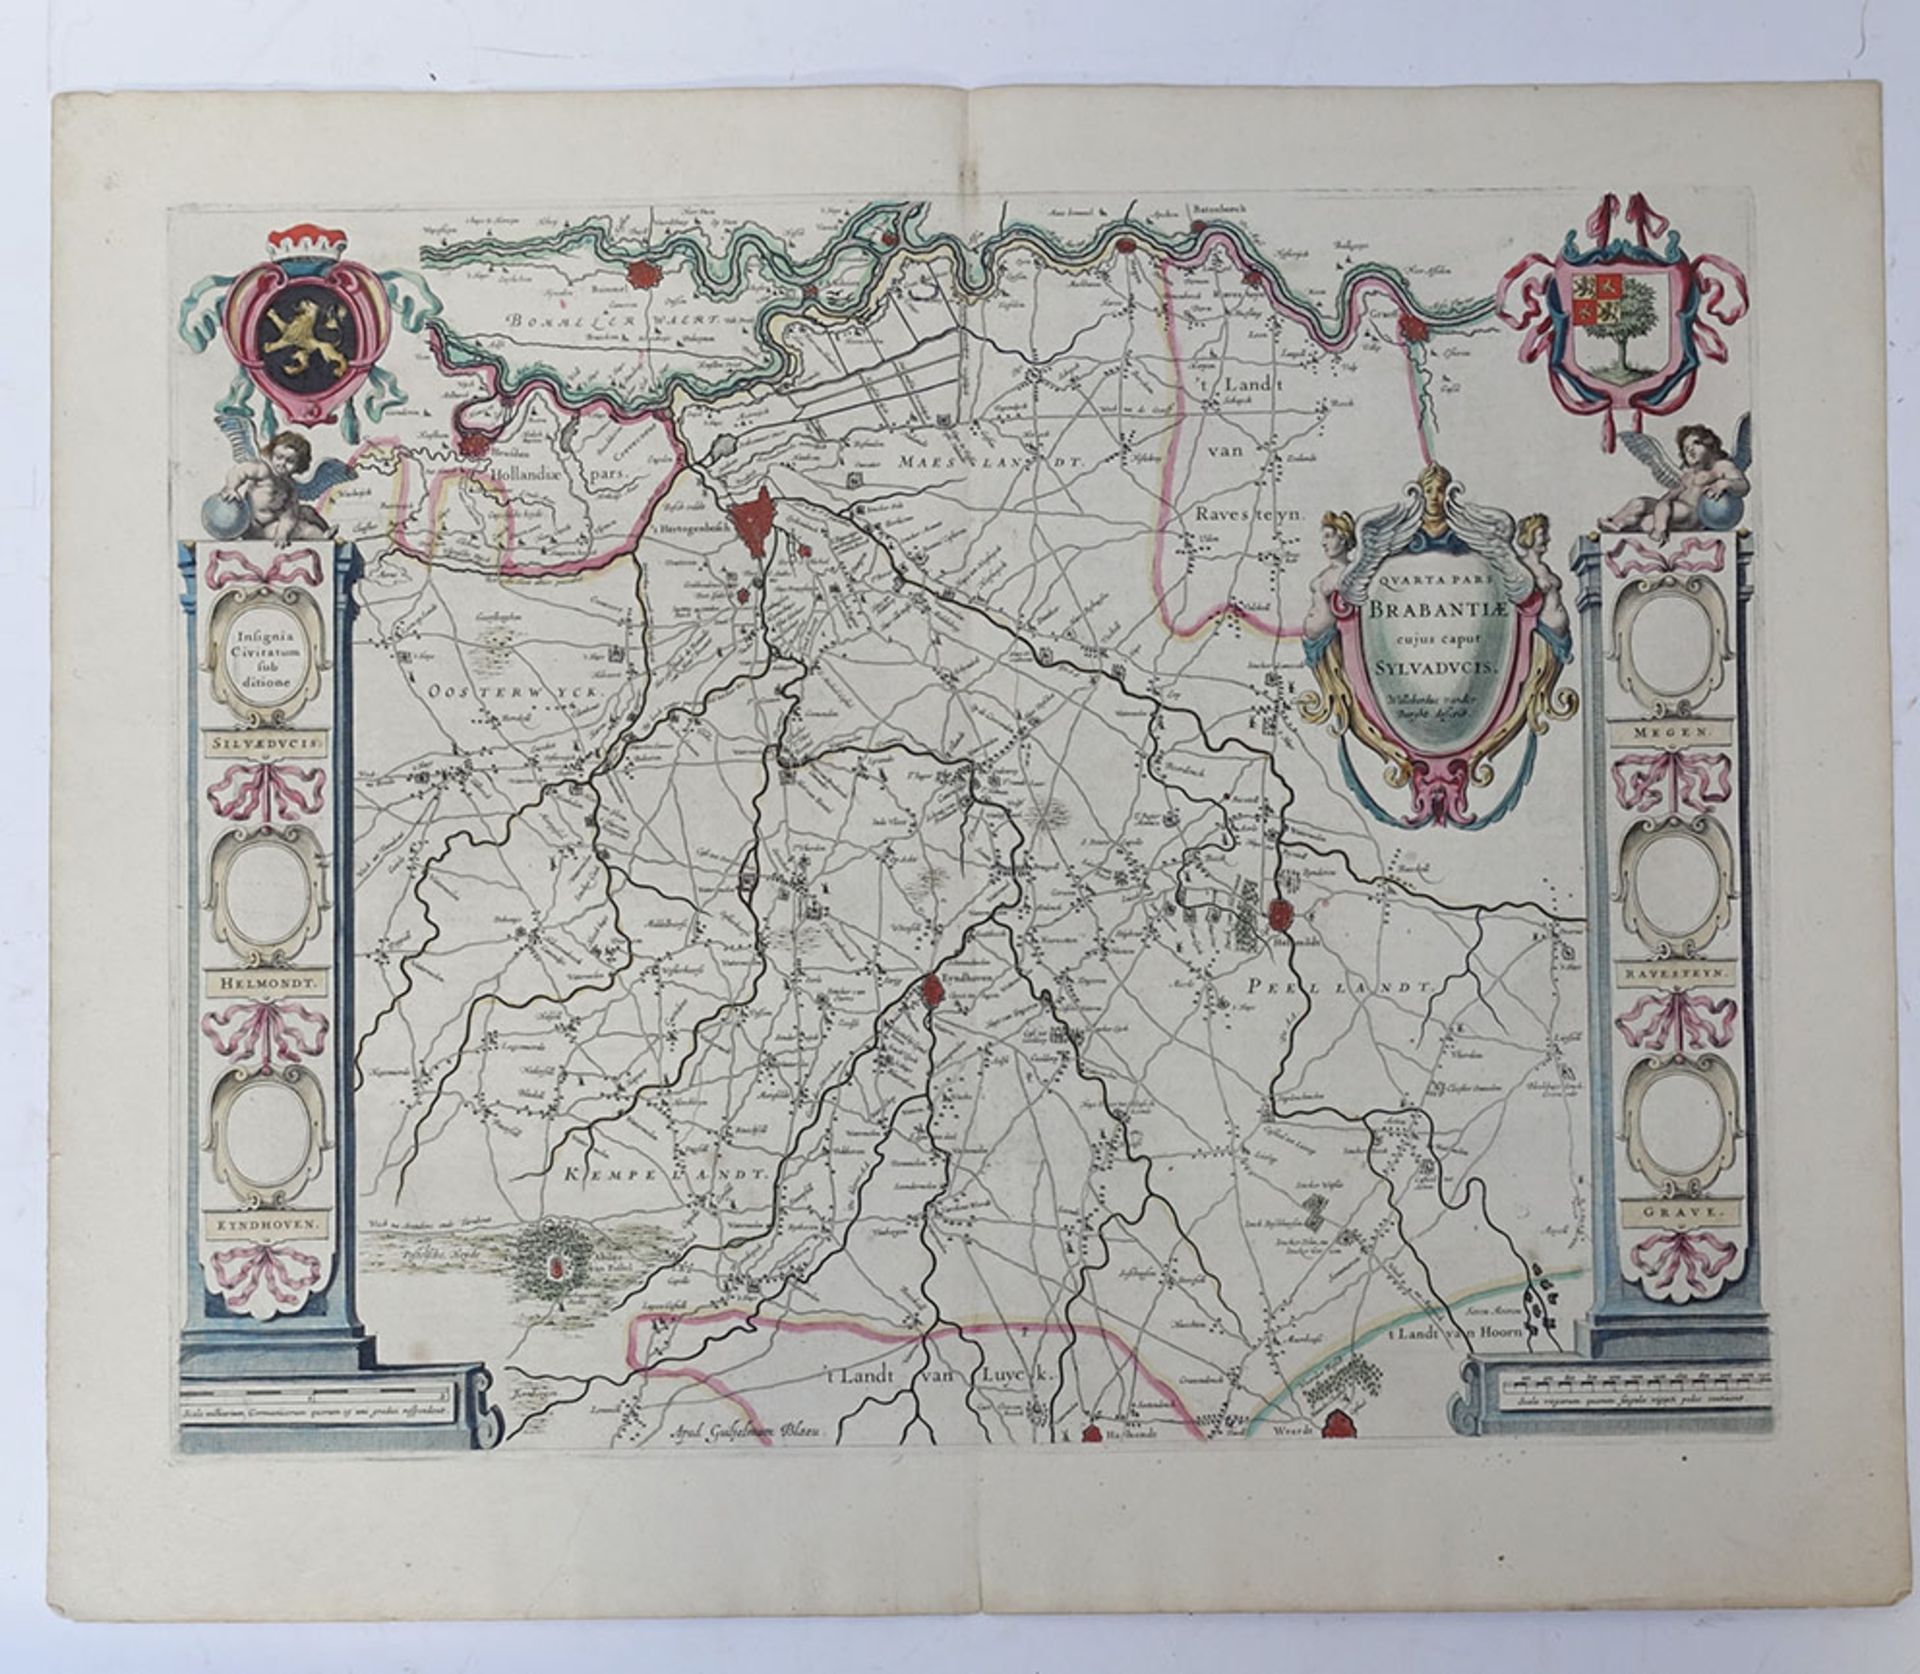 BRABANT -- "ACCURATISSIMA DITIONIS SYLVÆ-DUCENSIS TABULA". Amst., H. Hondius, (1634). Engr. map w. 2